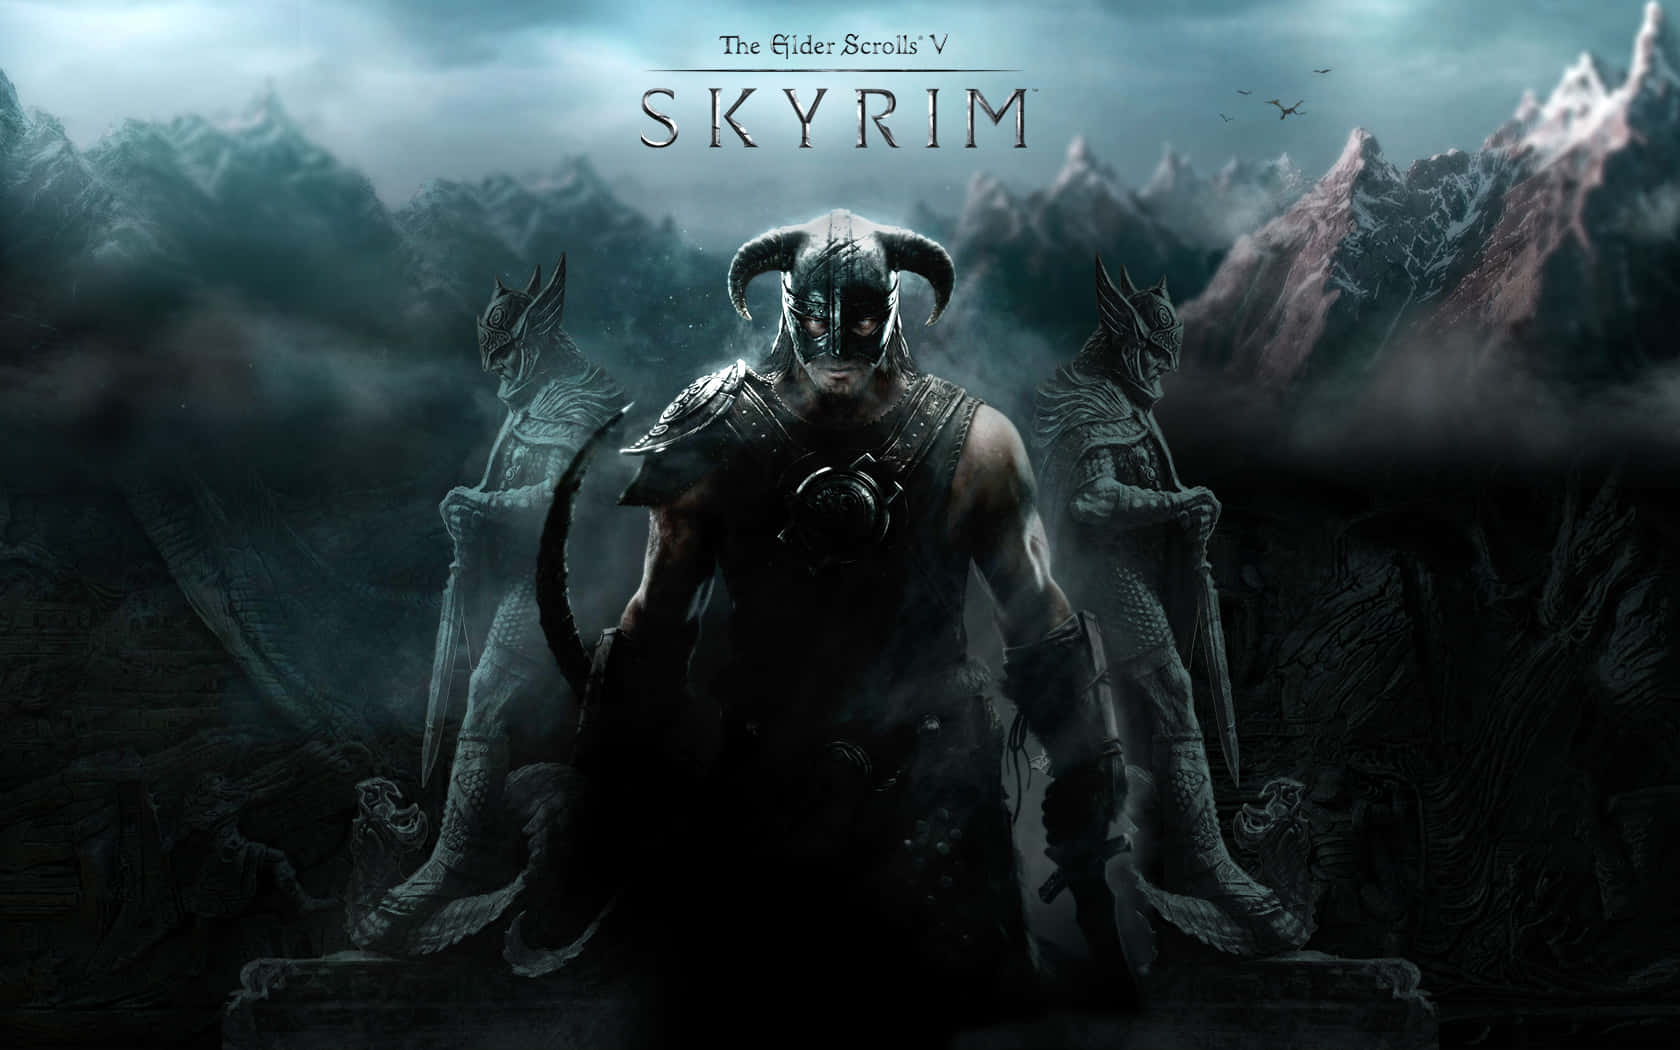 A Majestic View of Skyrim's Vast Landscape with a Warrior in the Forefront